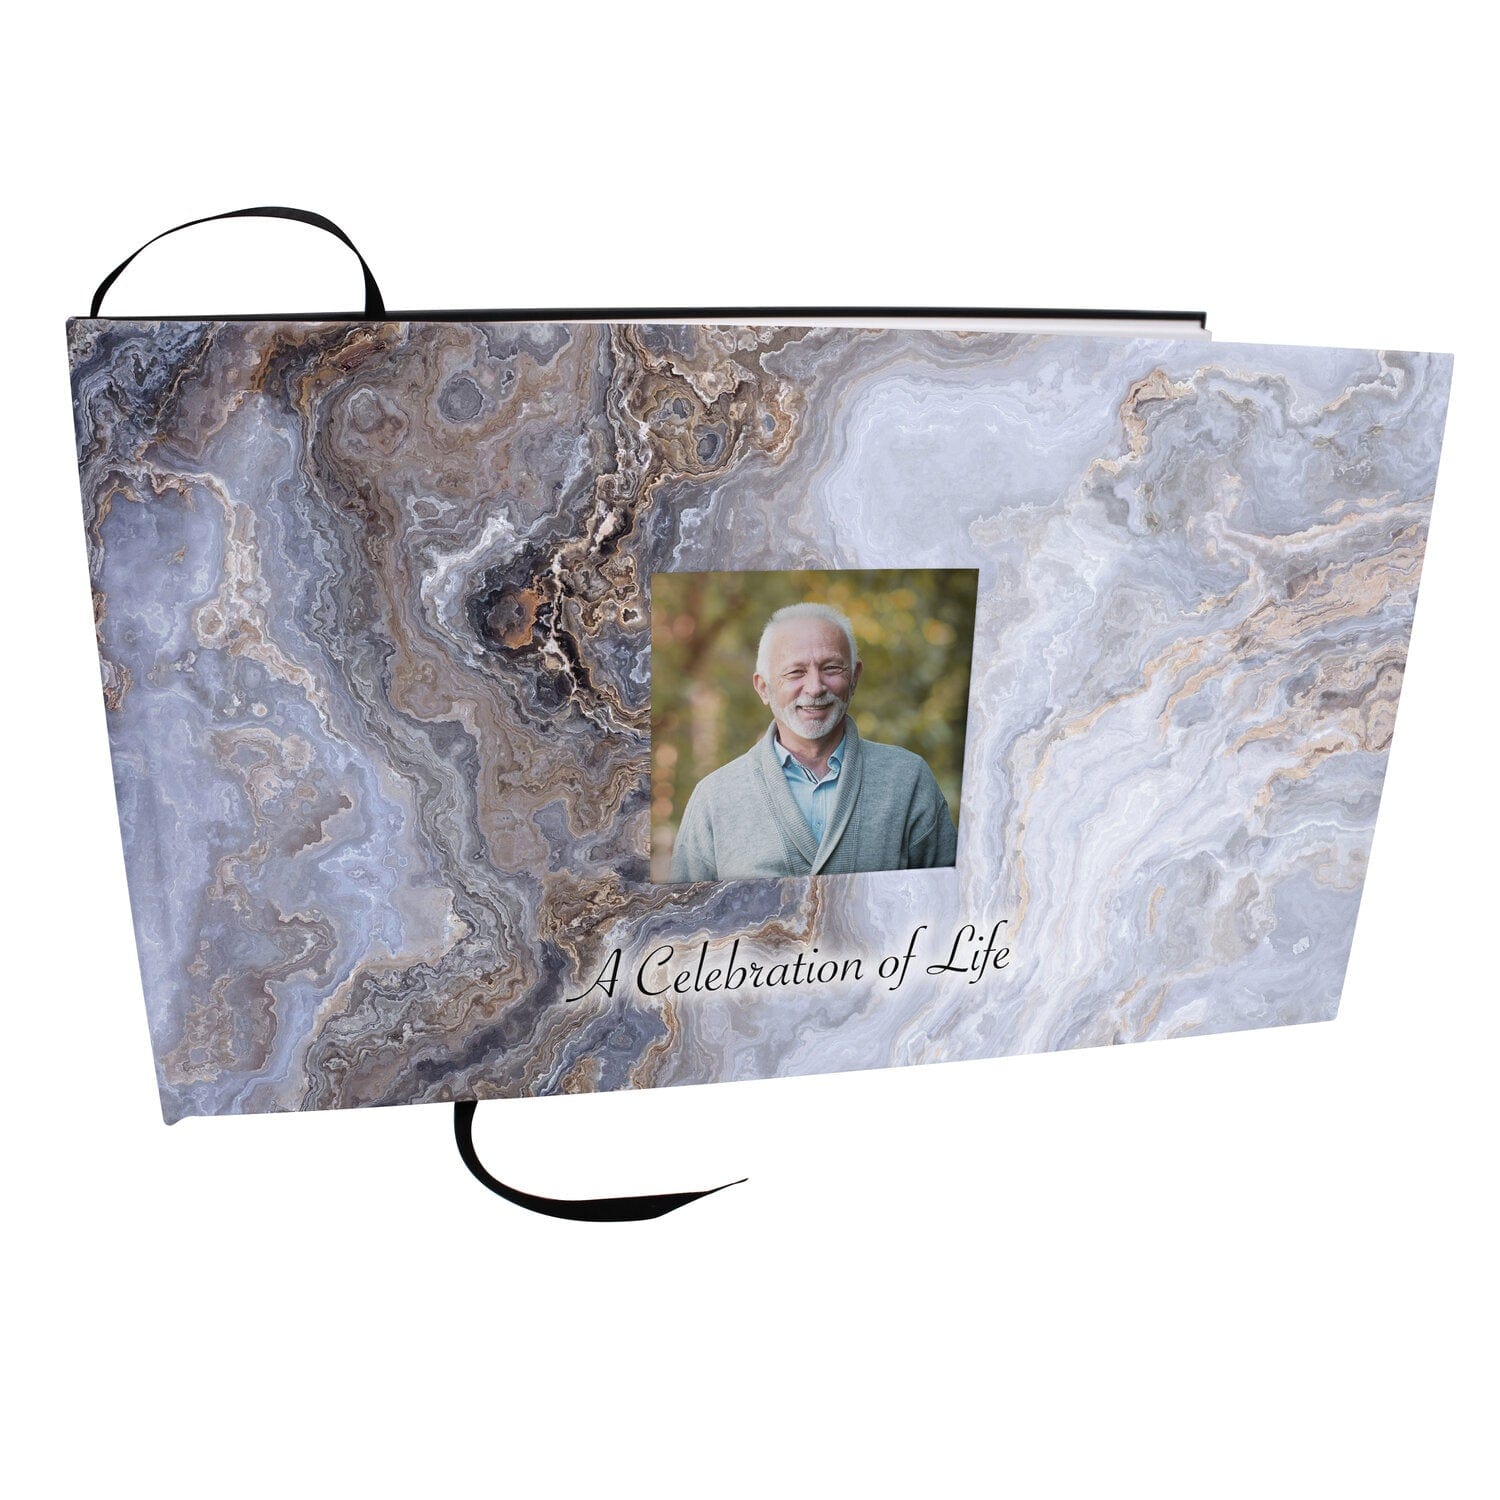 Commemorative Cremation Urns Home & Garden Marble Matching Themed 'Celebration of Life' Guest Book for Funeral or Memorial Service